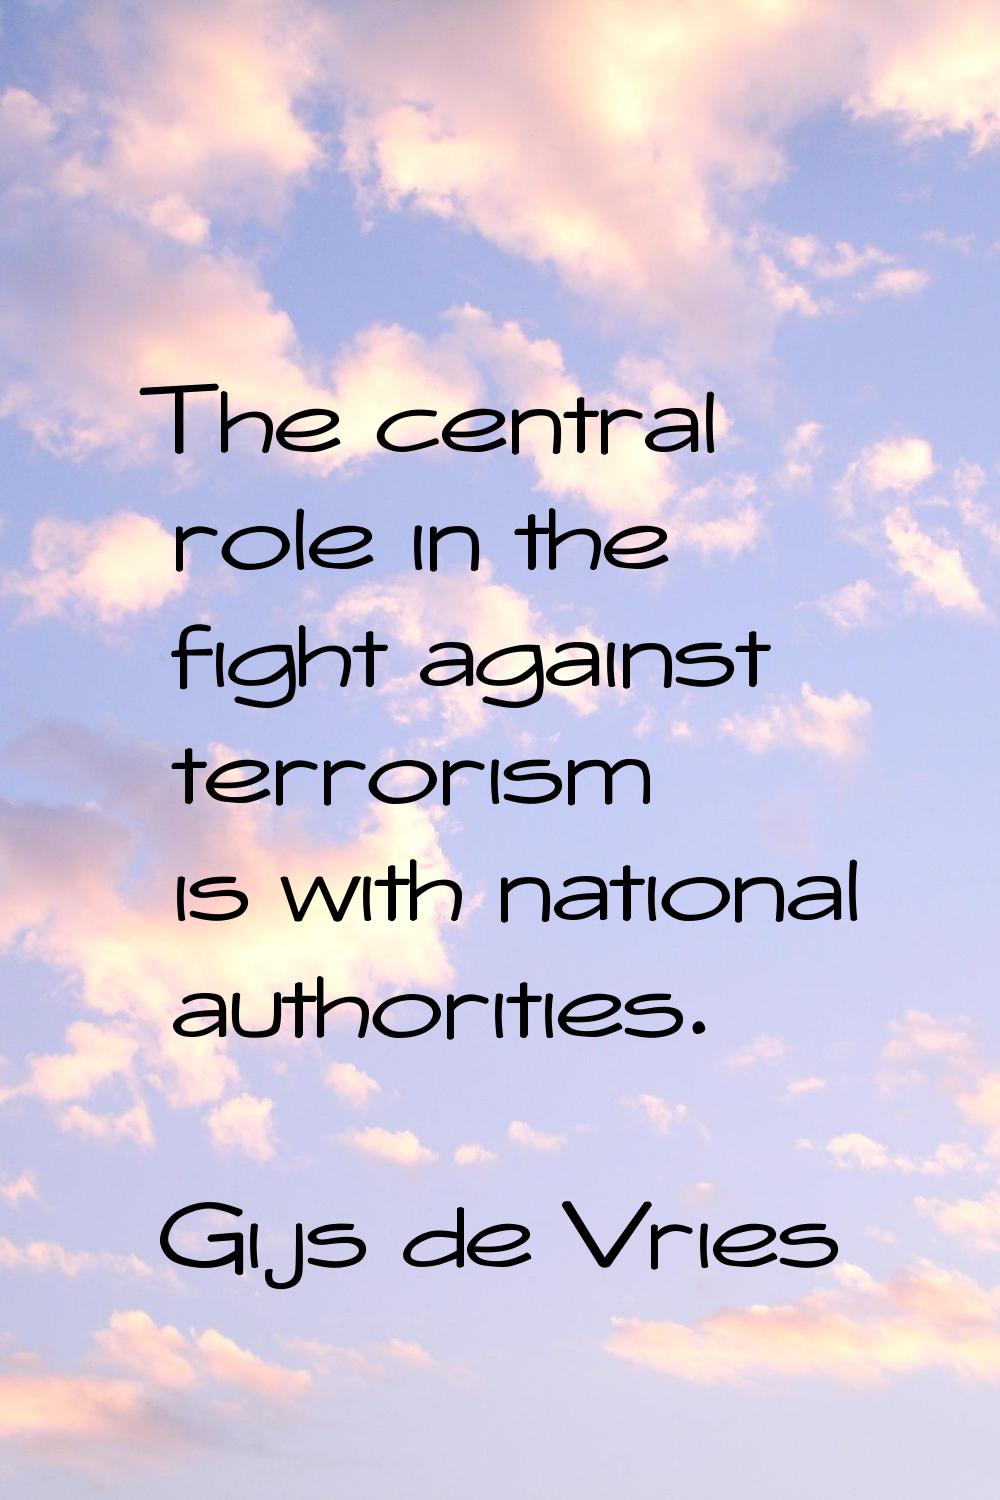 The central role in the fight against terrorism is with national authorities.